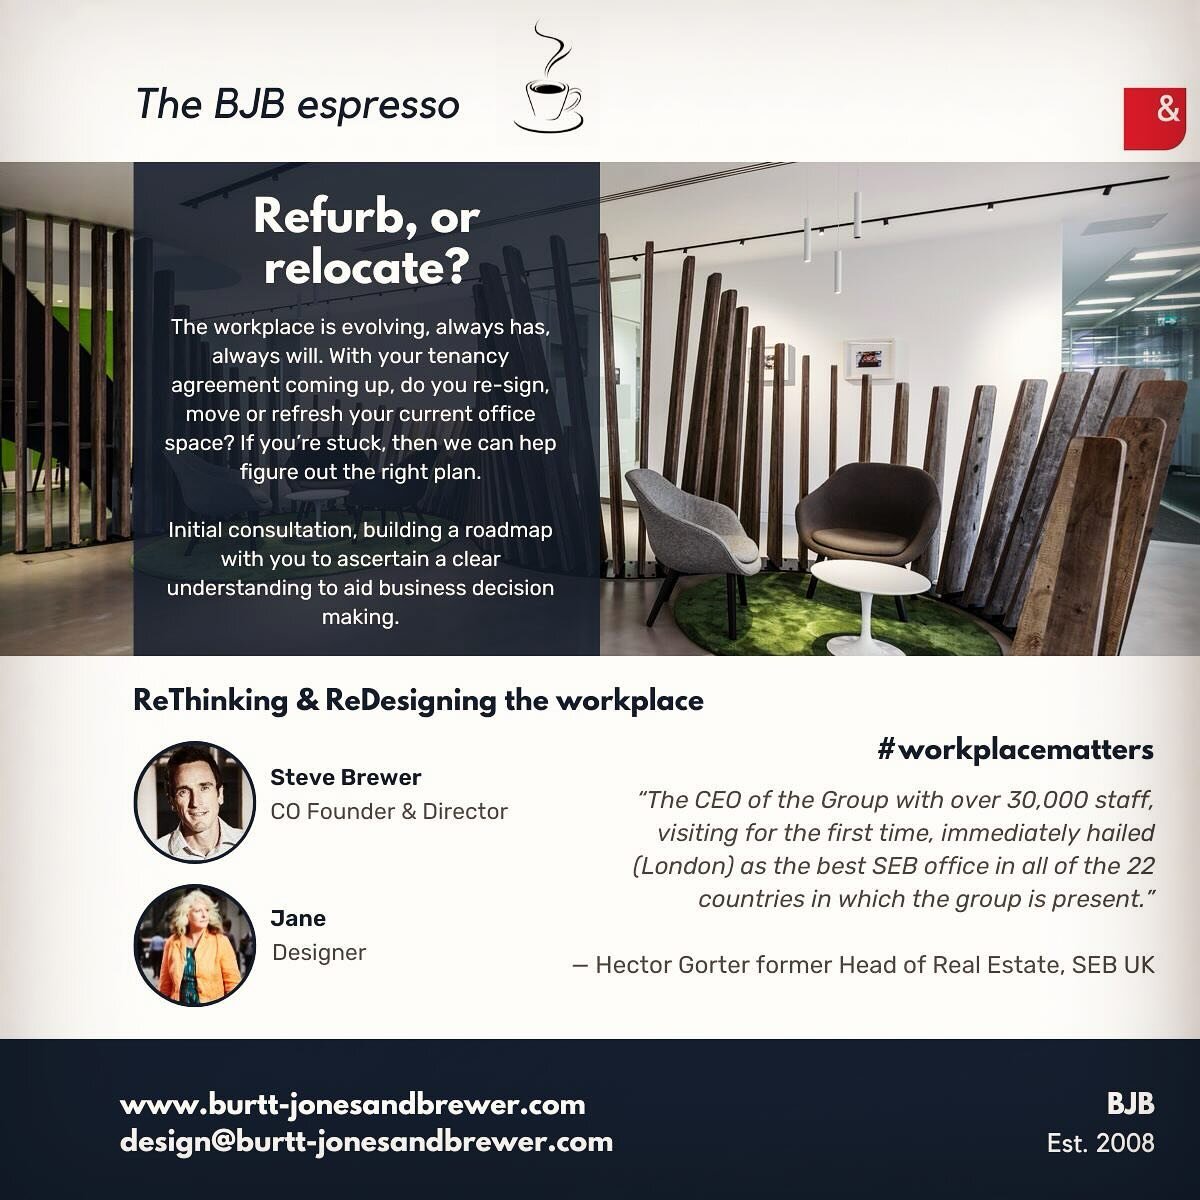 Welcome to the BJB espresso!

BJB started over a coffee back in 2008. The BJB espresso are single and double size thoughts, guidance and information on all things workplace.

#REthinkingtheWorkplace&nbsp;#WorkplaceMatters&nbsp;#RedesigningtheWorkplac